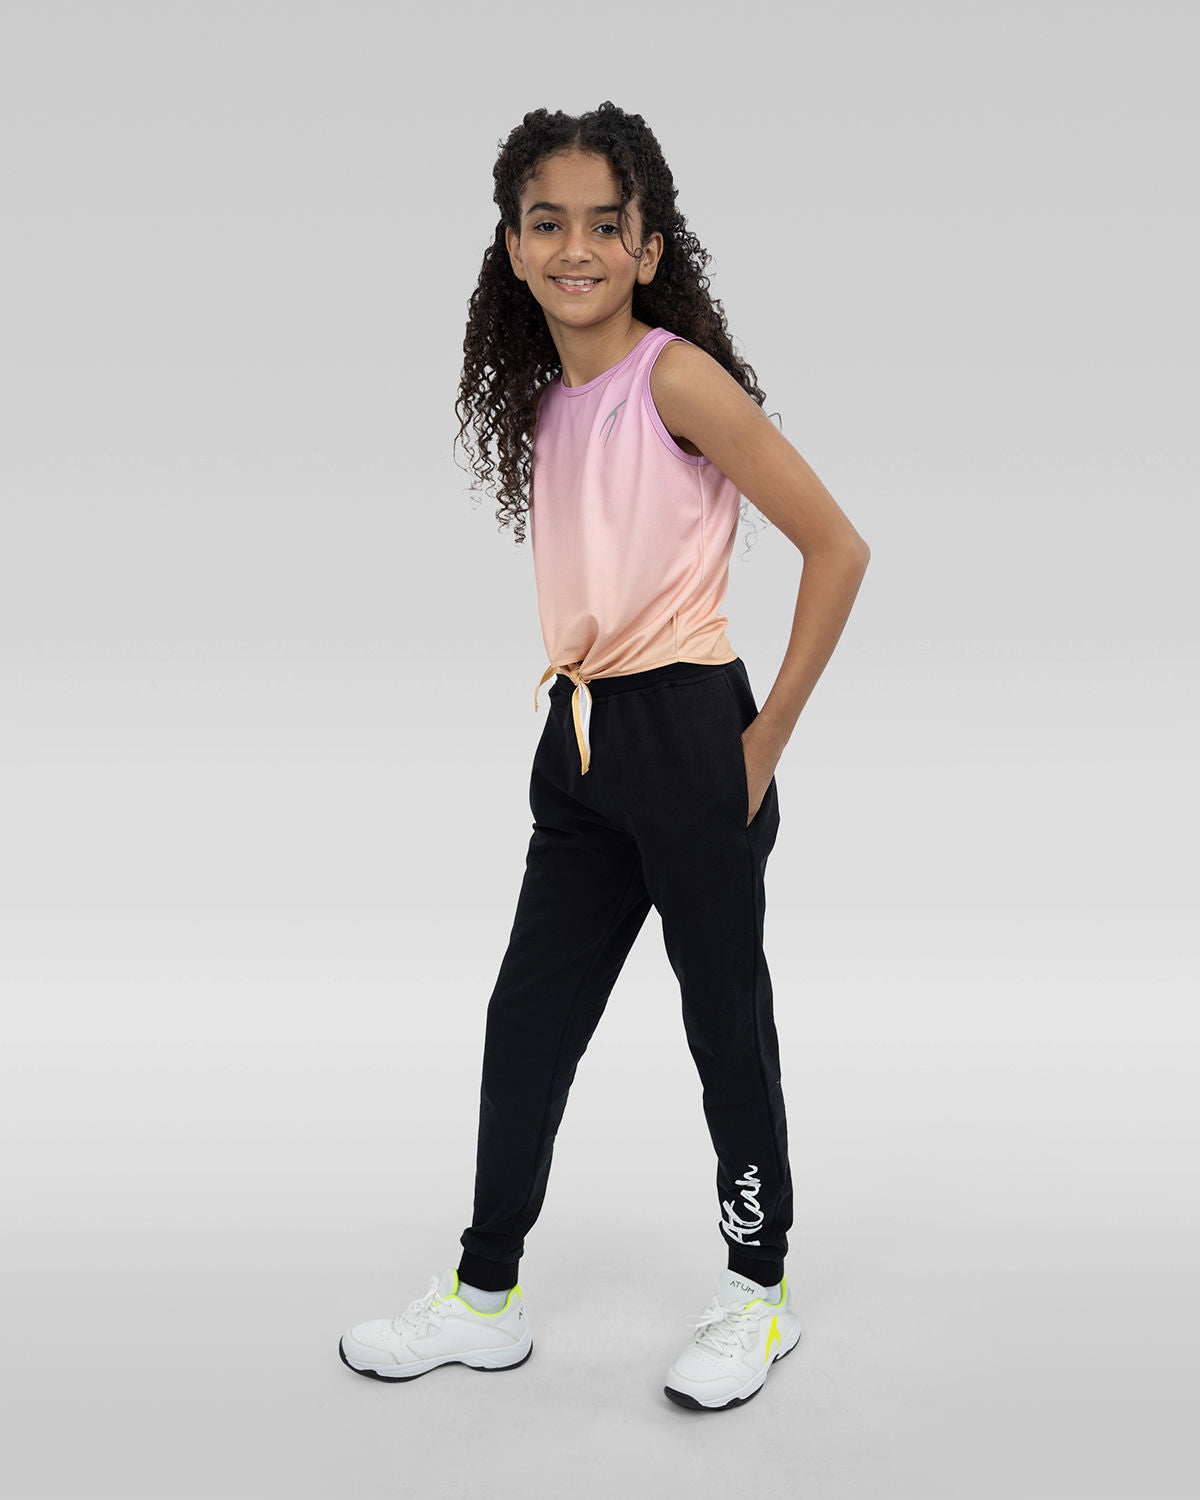 Simple and smooth girls sweatpants - Atum Egypt #